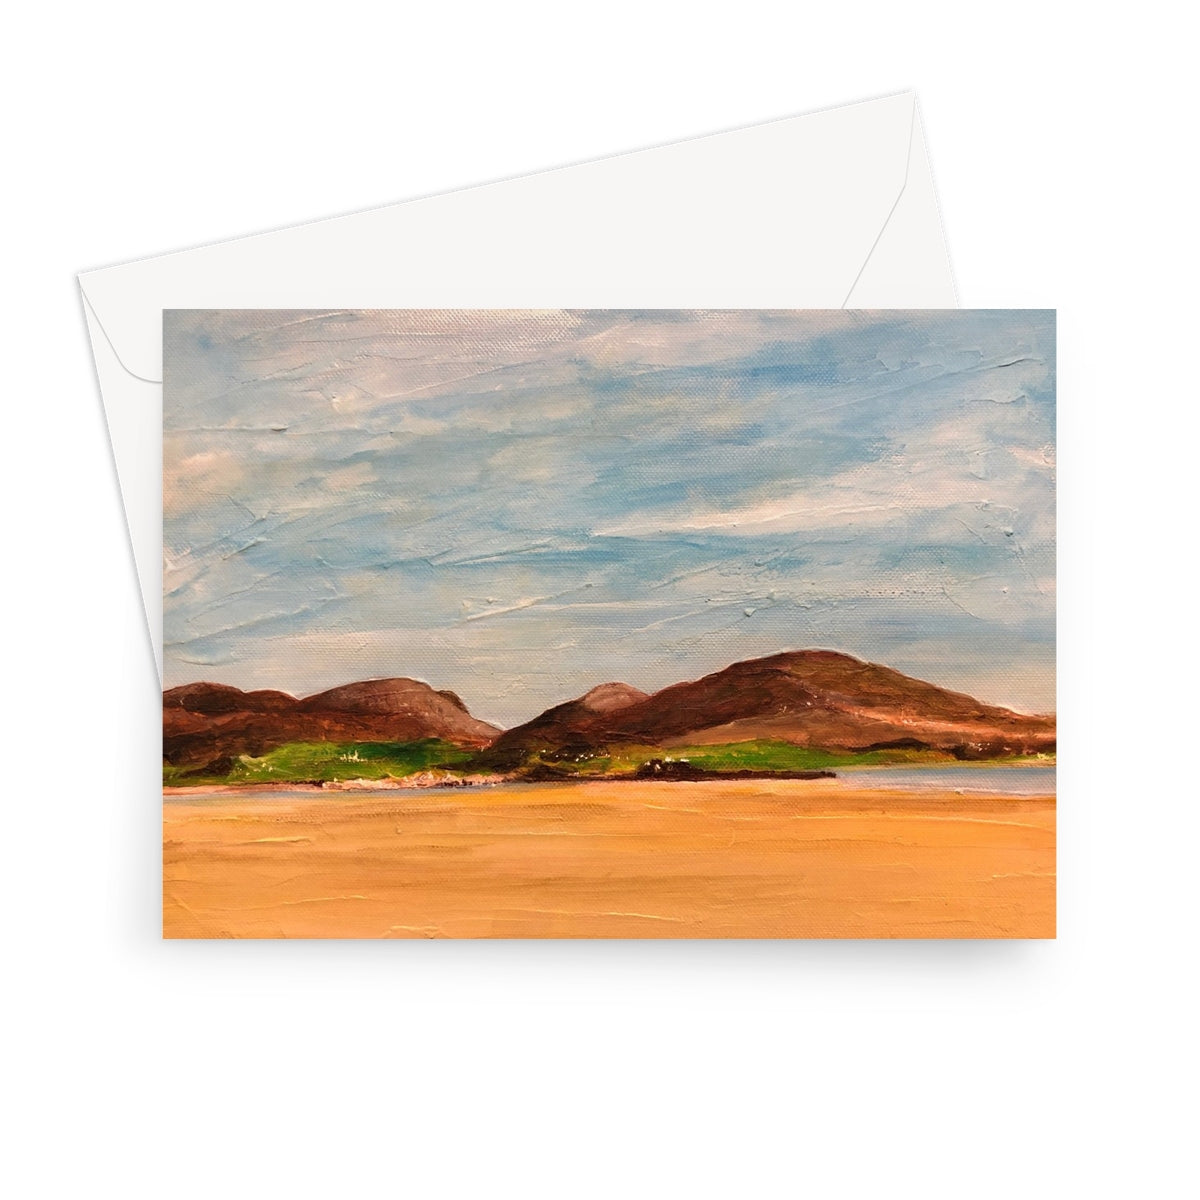 Uig Sands Lewis Art Gifts Greeting Card-Greetings Cards-Hebridean Islands Art Gallery-7"x5"-10 Cards-Paintings, Prints, Homeware, Art Gifts From Scotland By Scottish Artist Kevin Hunter